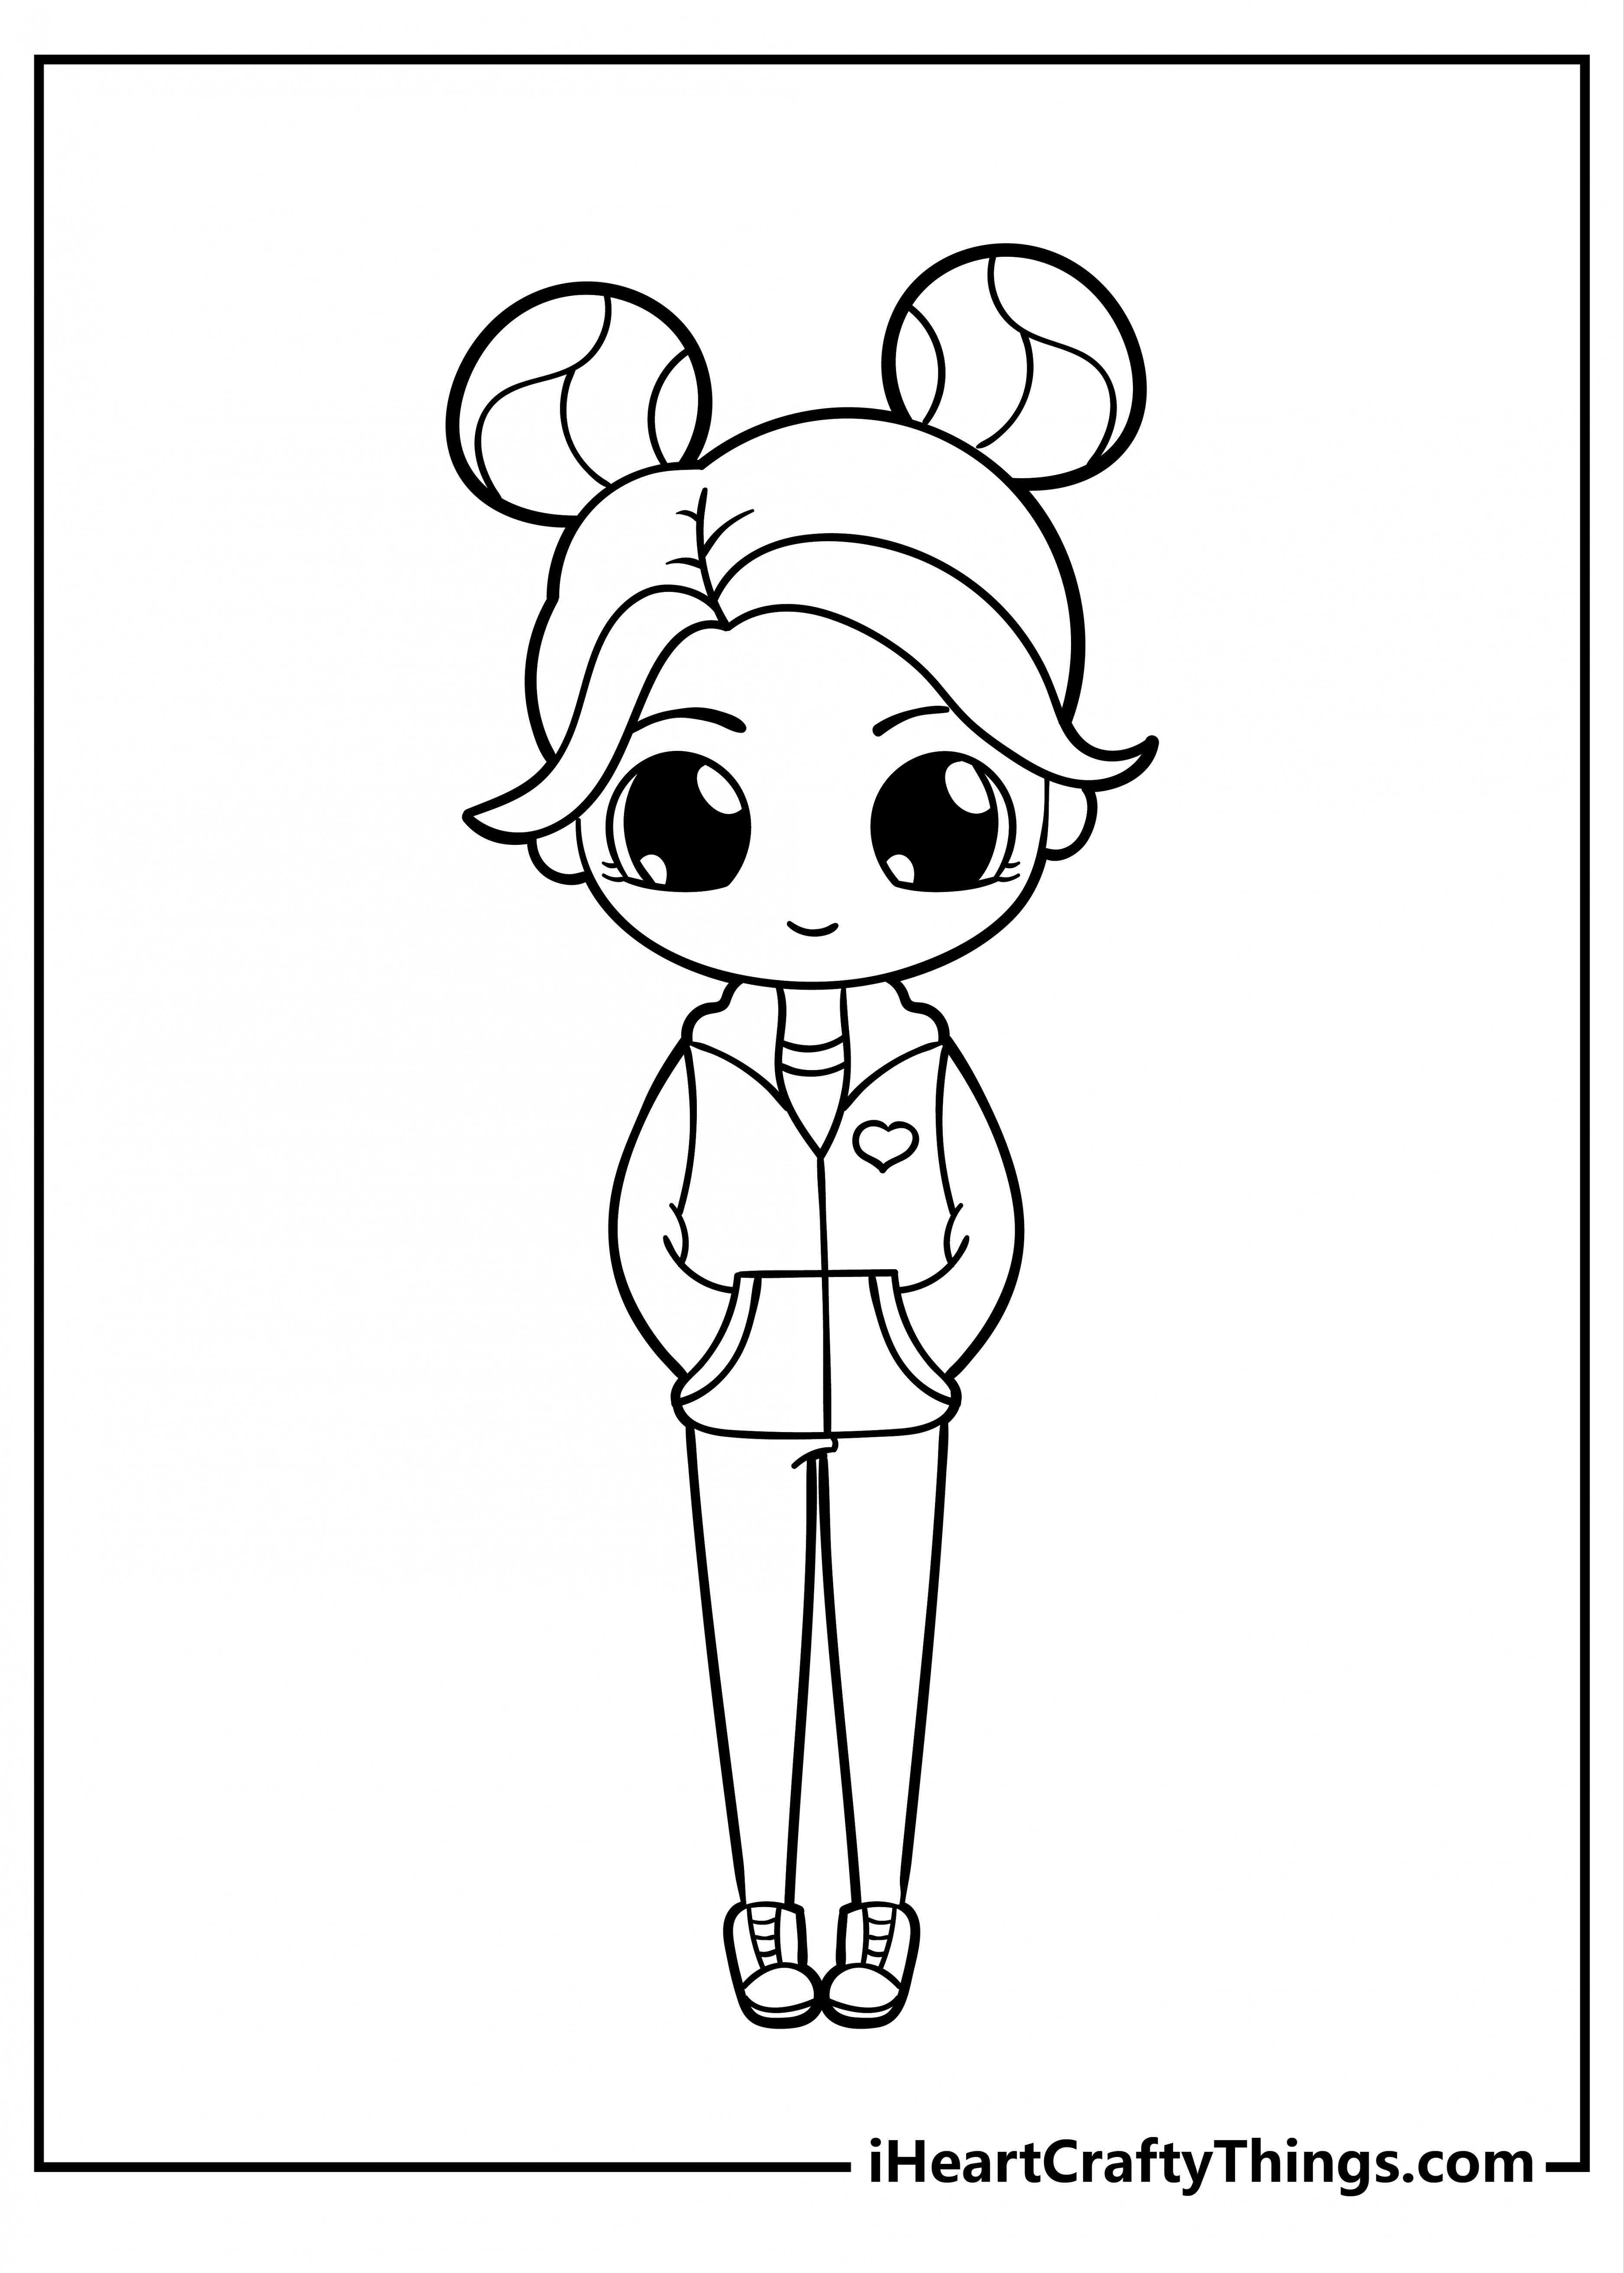 Free Printable Coloring Pages For Girls - Printable - Printable Cute Coloring Pages For Girls (Updated )